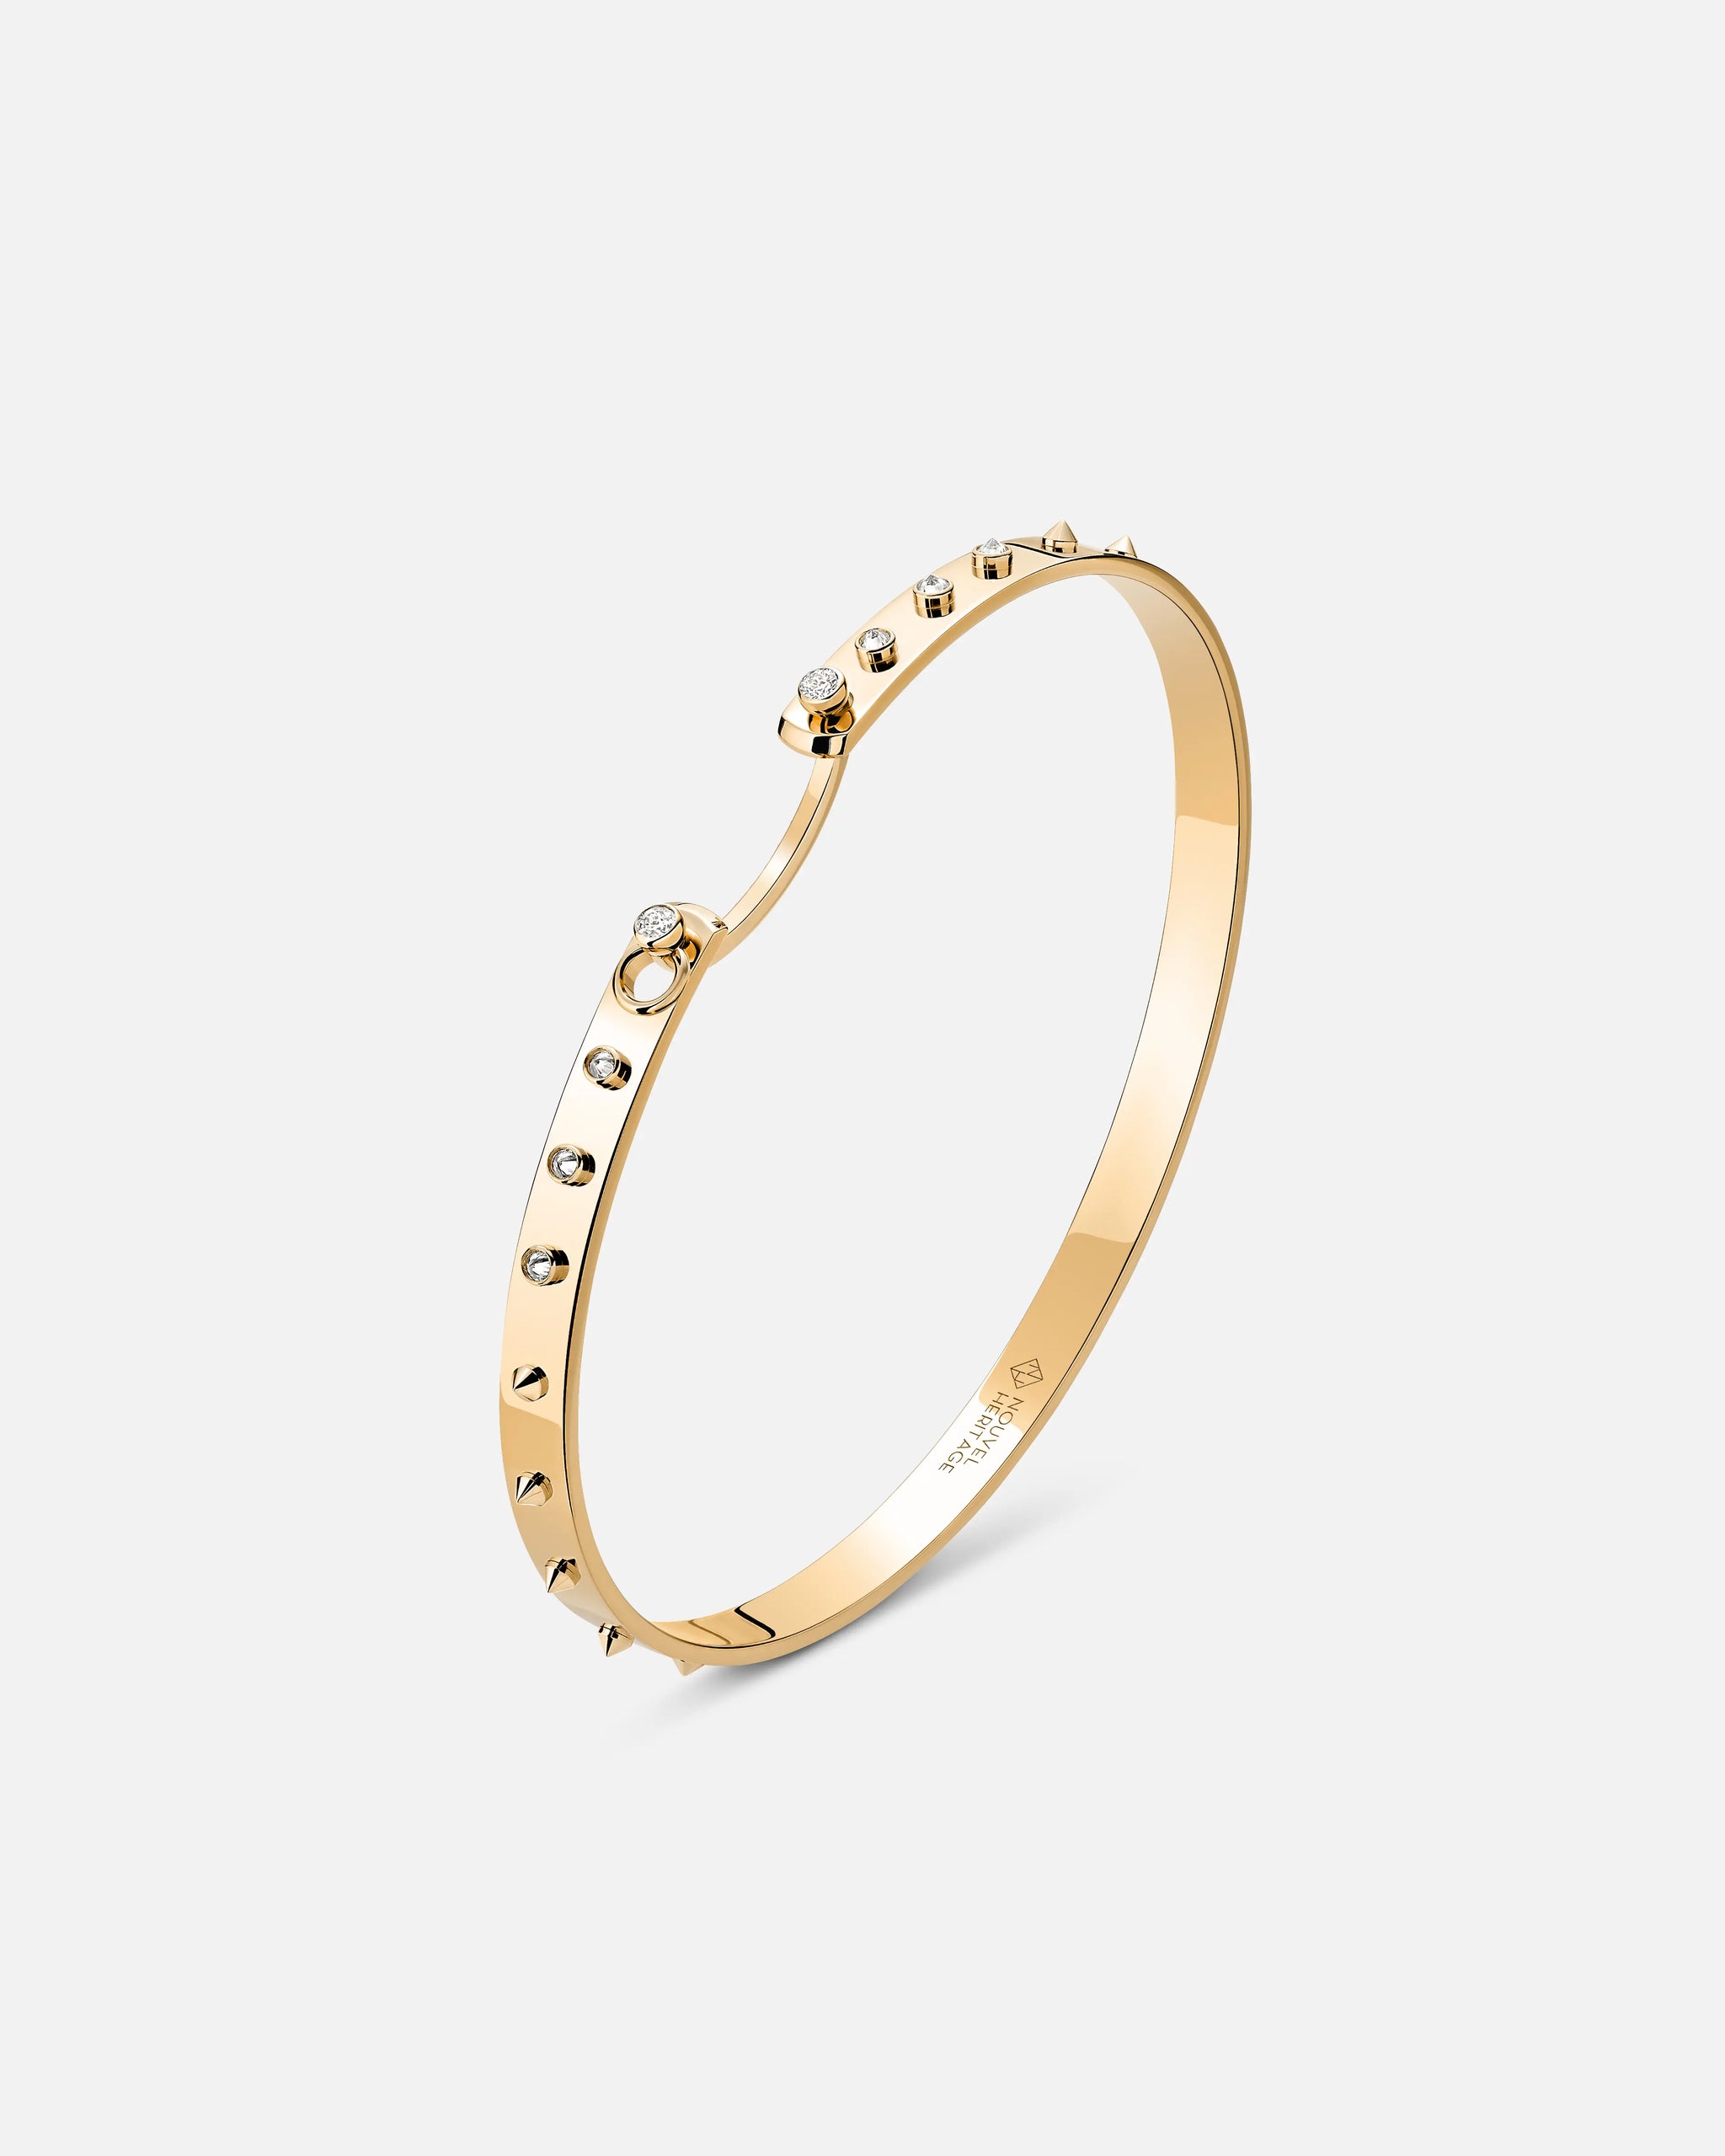 Brunch in NY Mood Bangle in Yellow Gold - 1 - Nouvel Heritage